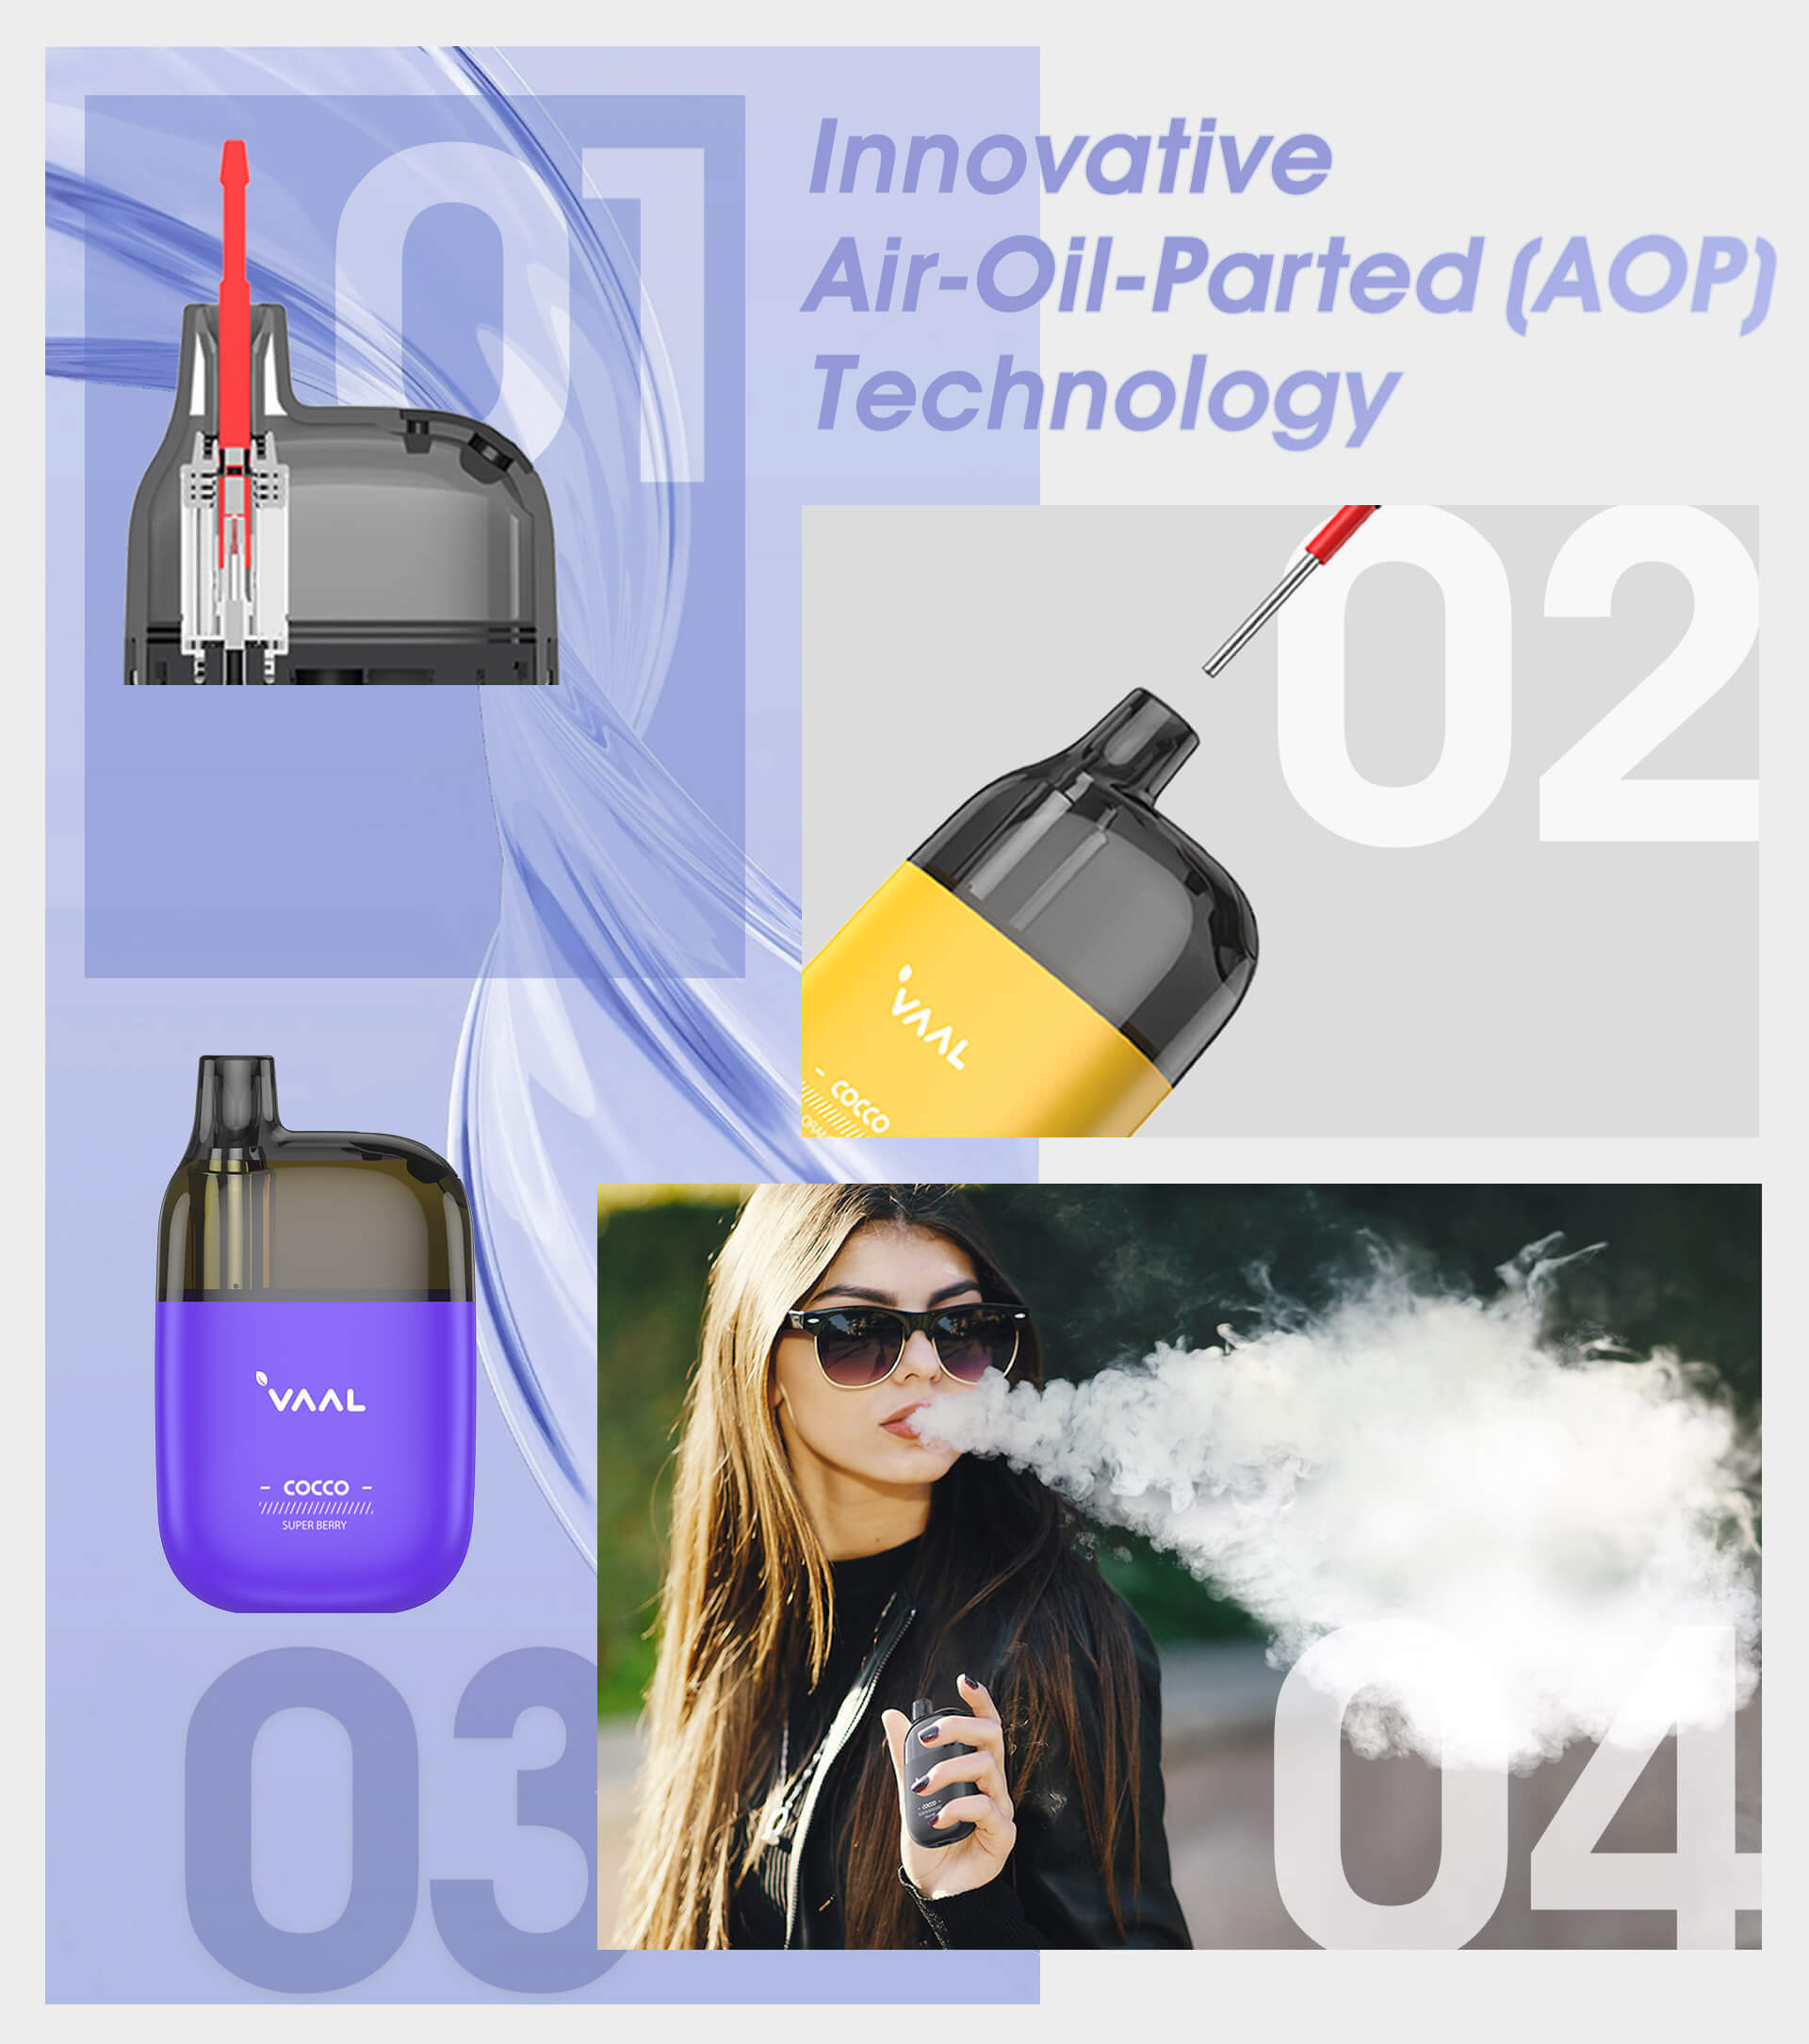 Innovative Air-Oil-Parted(AOP) Technology.